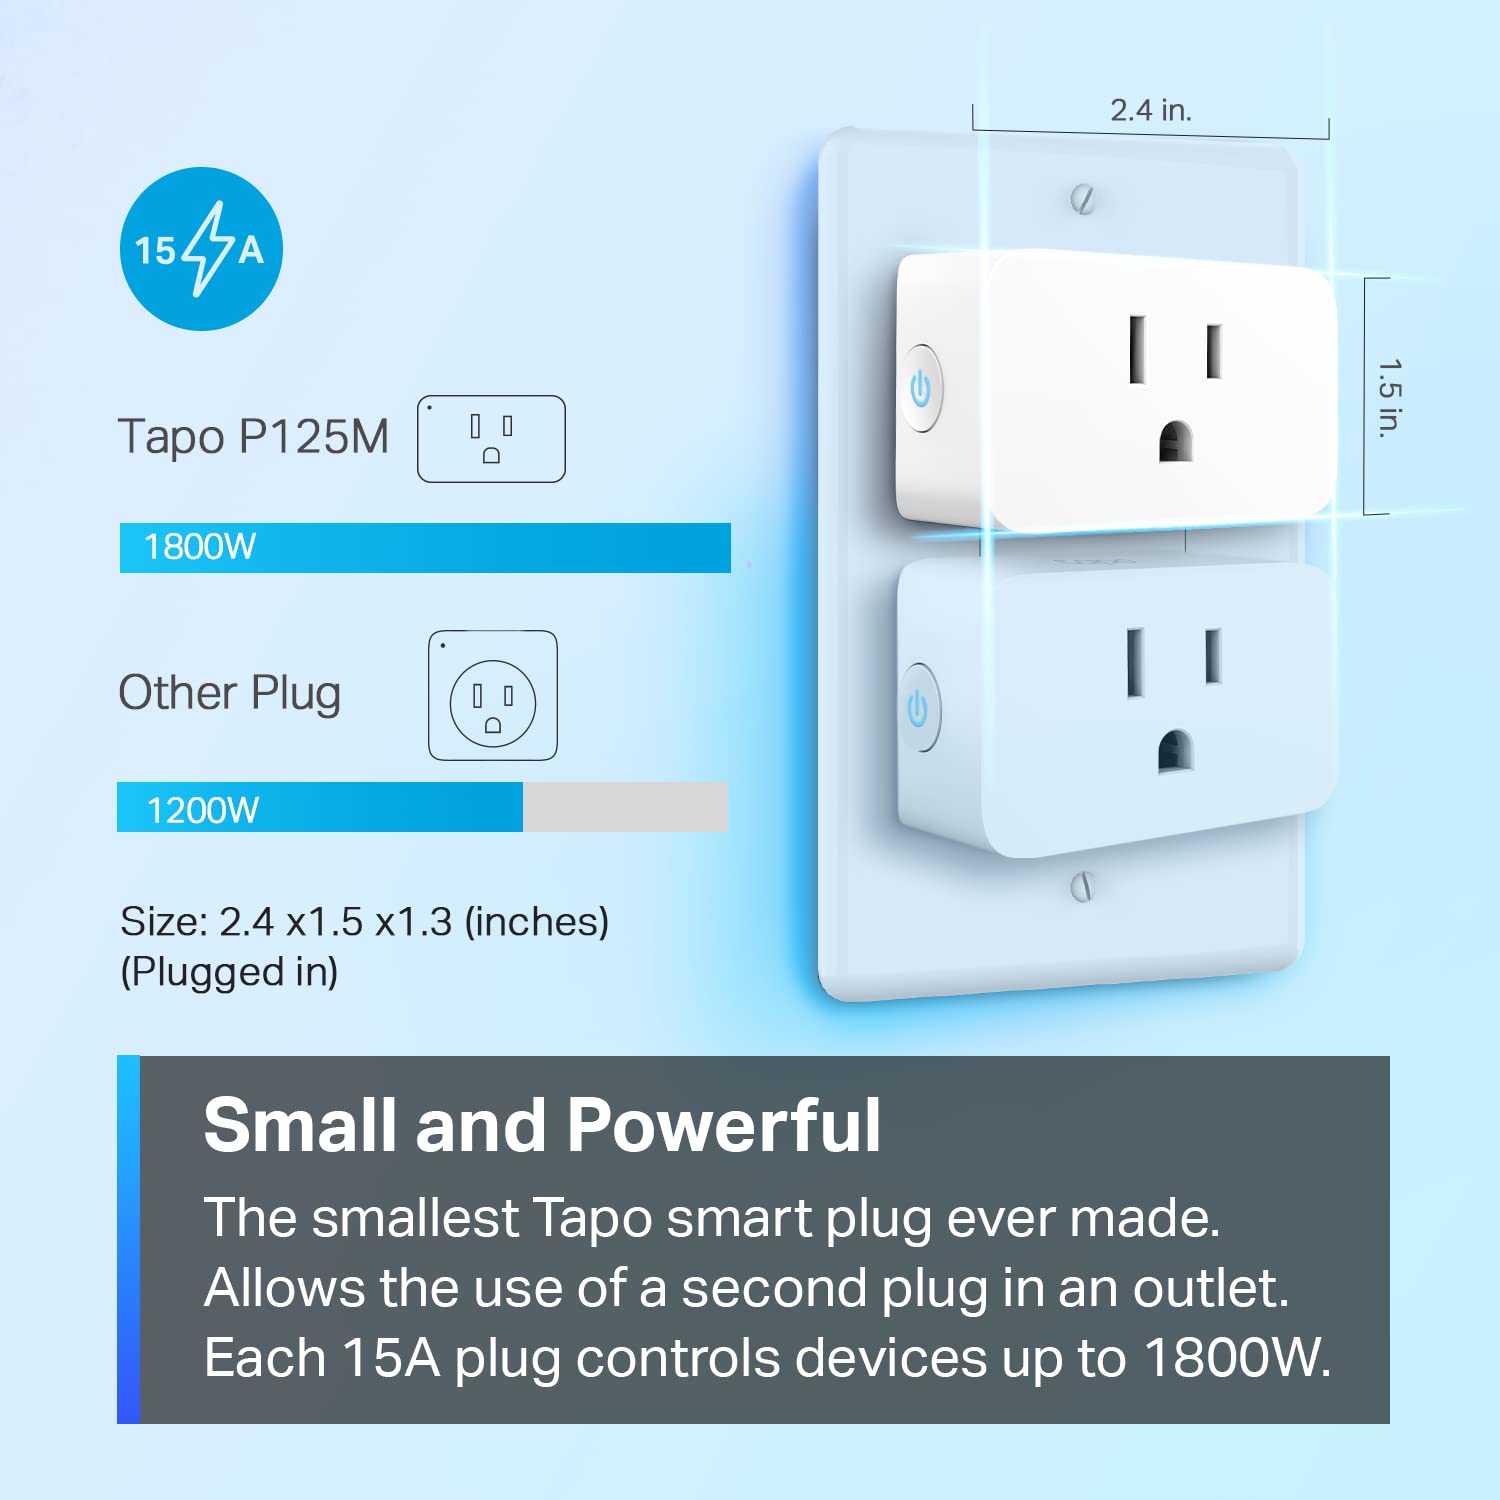 TP-Link Tapo Matter Compatible Smart Plug Mini, Compact Design, 15A/1800W Max, Super Easy Setup, Works with Apple Home, Alexa & Google Home, UL Certified, 2.4G Wi-Fi Only, White, Tapo P125M